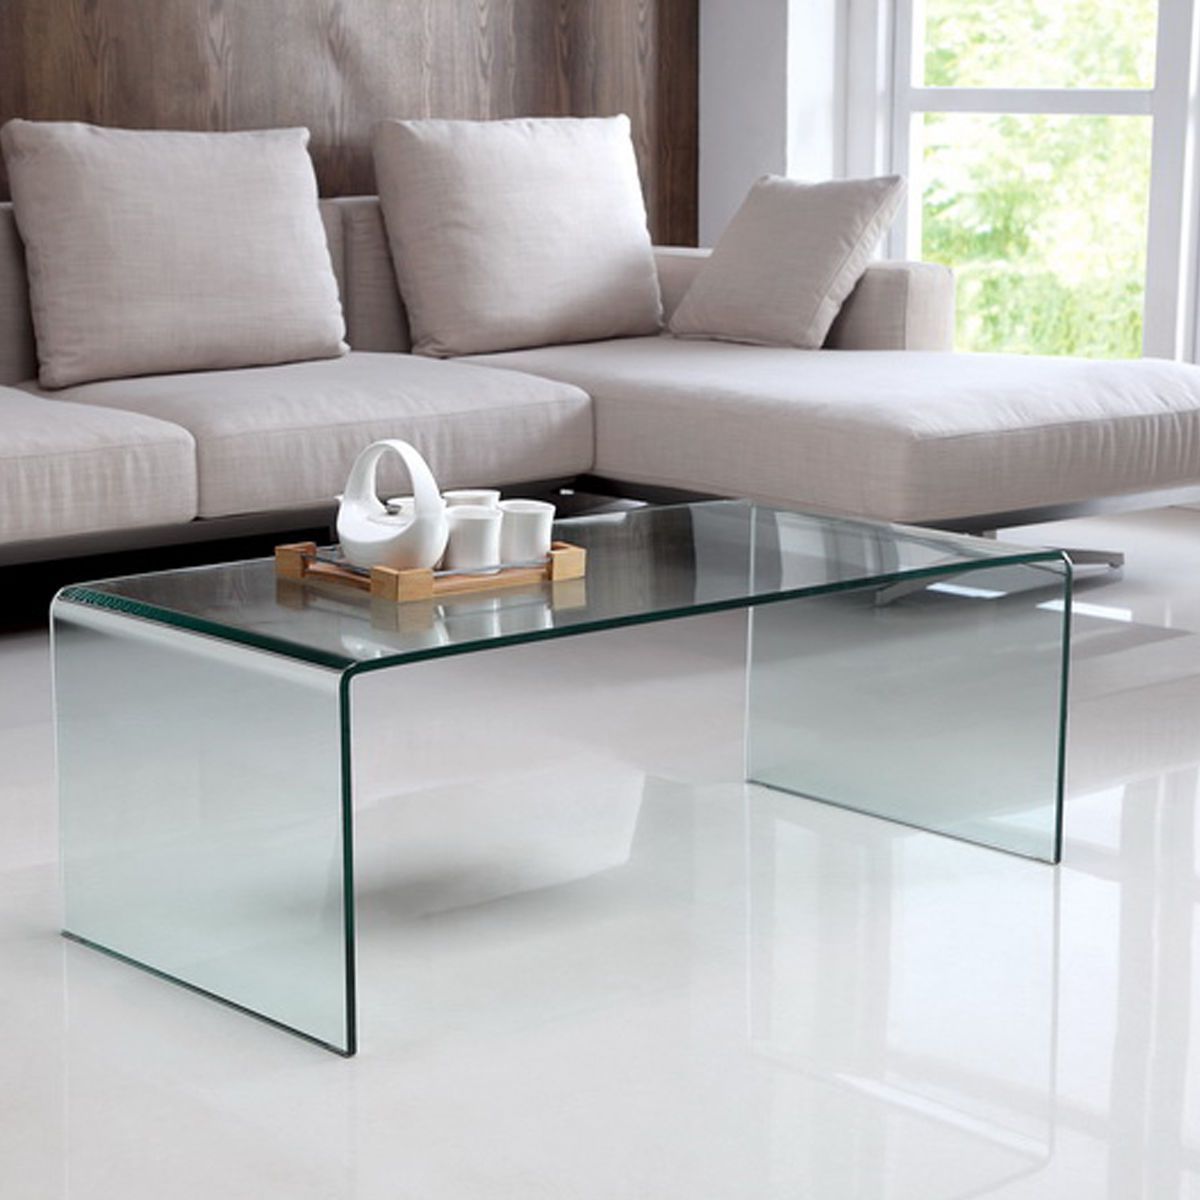 Modern Tempered Glass Coffee Cocktail Table Accent Living Room Furniture Regarding Most Current Tempered Glass Coffee Tables (View 2 of 15)